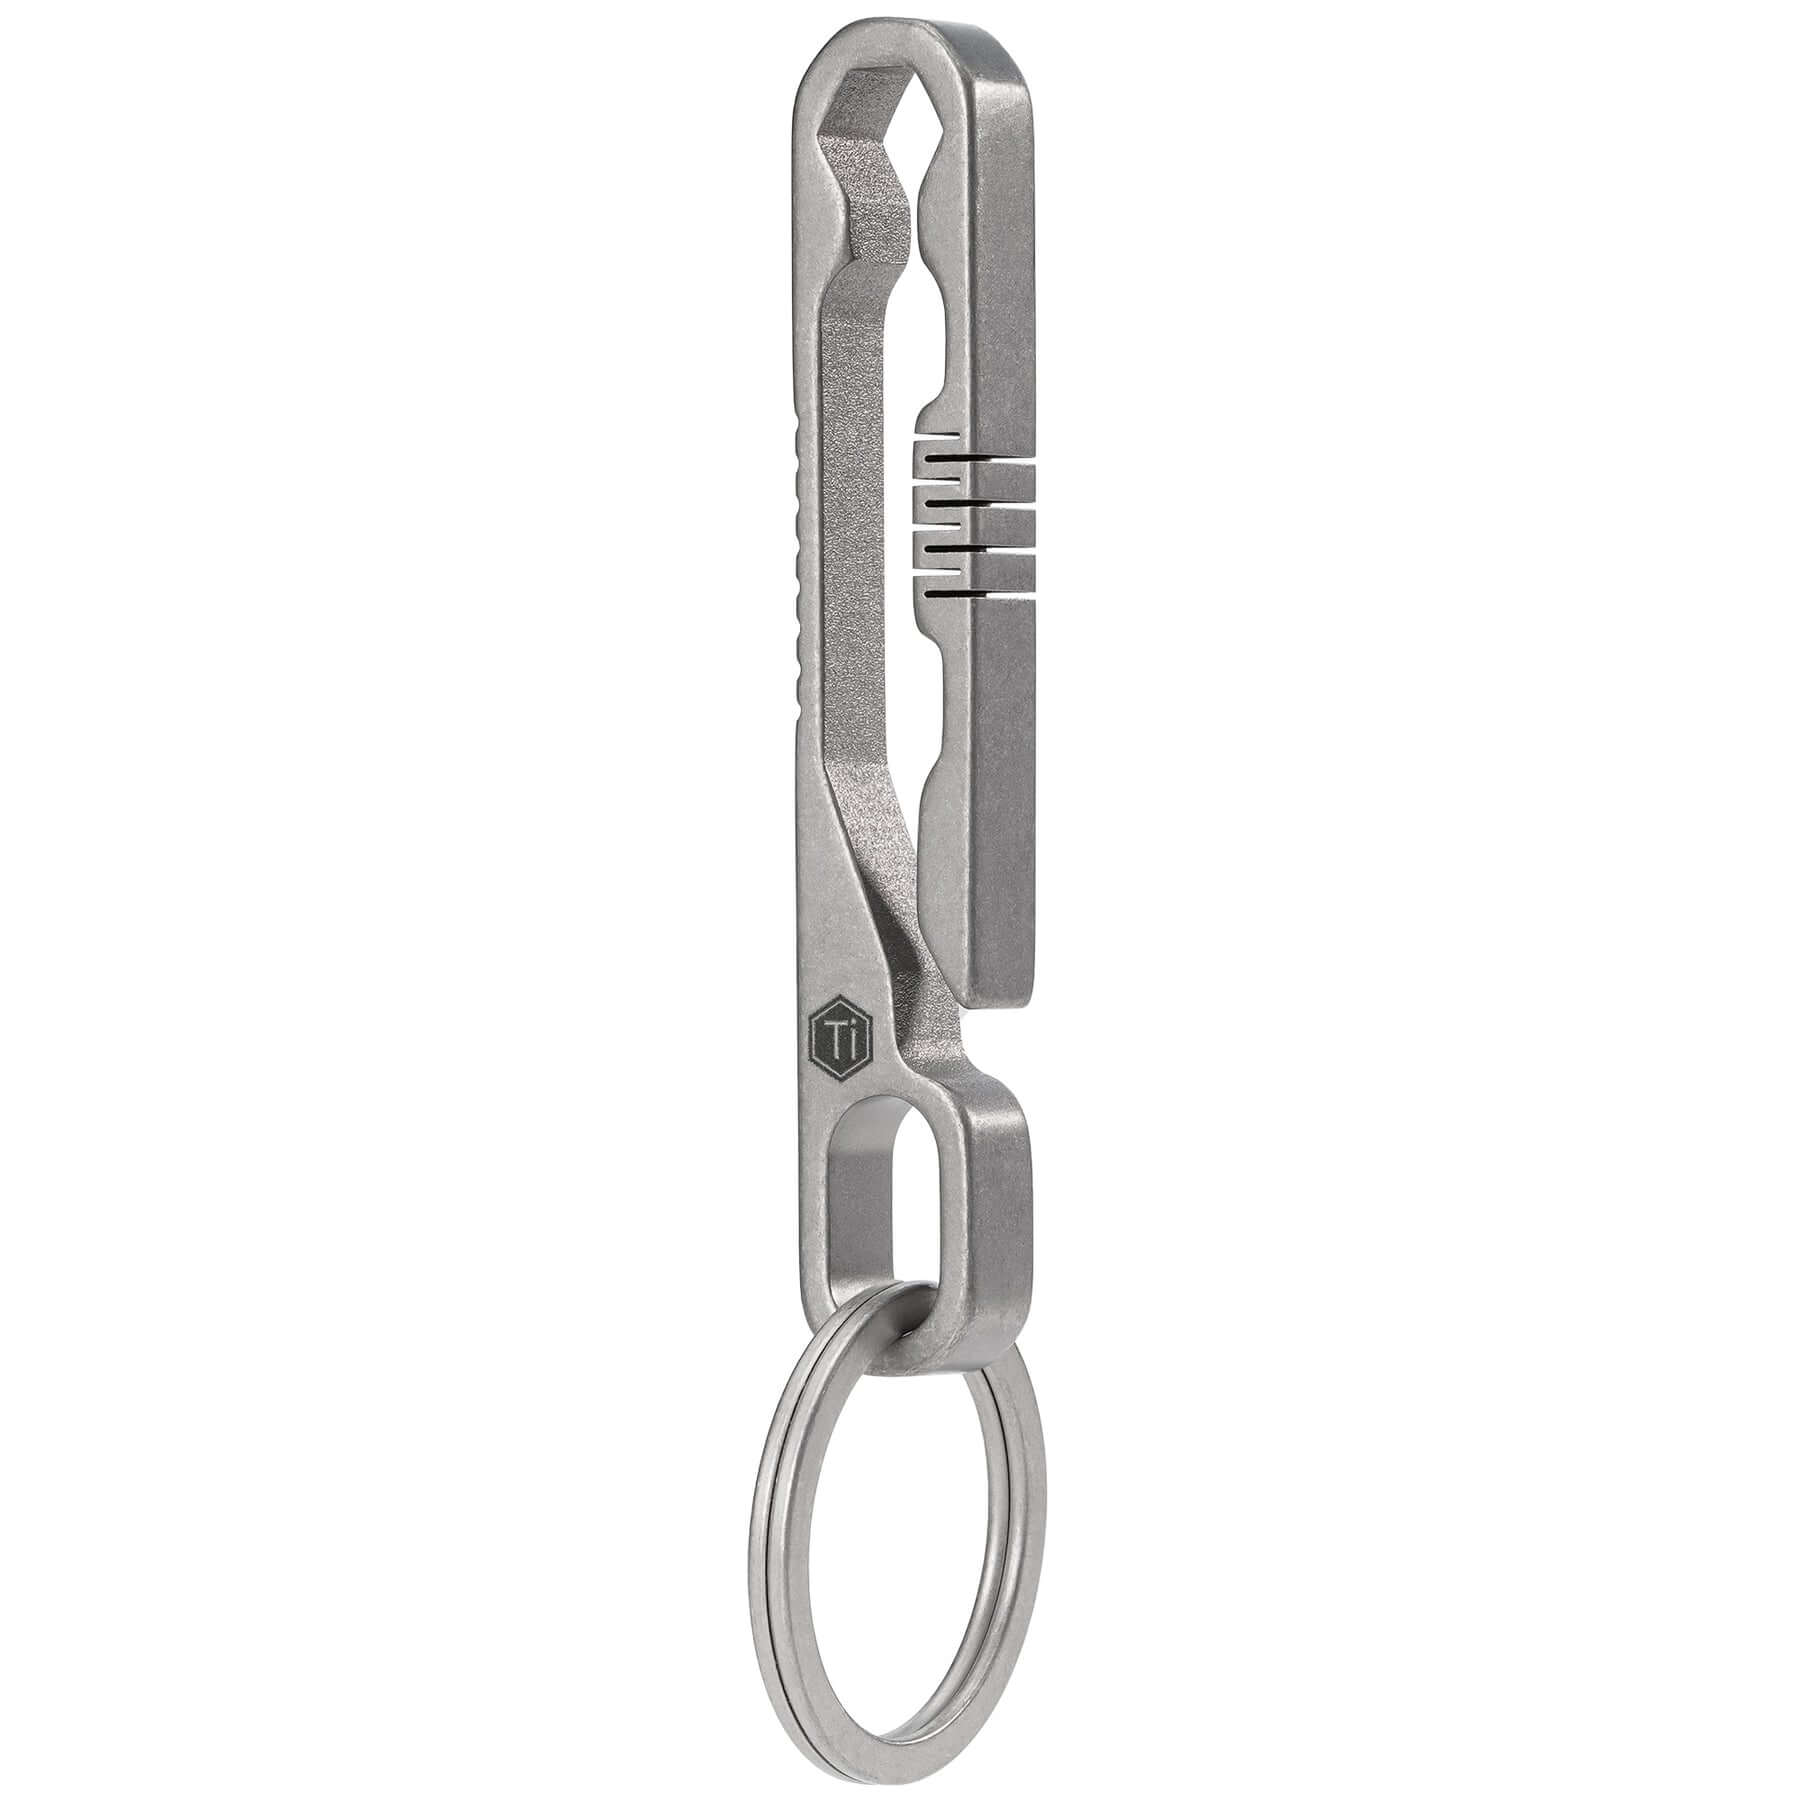 Titanium Belt Loop Keychain Clip Quick Release, Carabiner Key Holder with  Detachable Key Ring